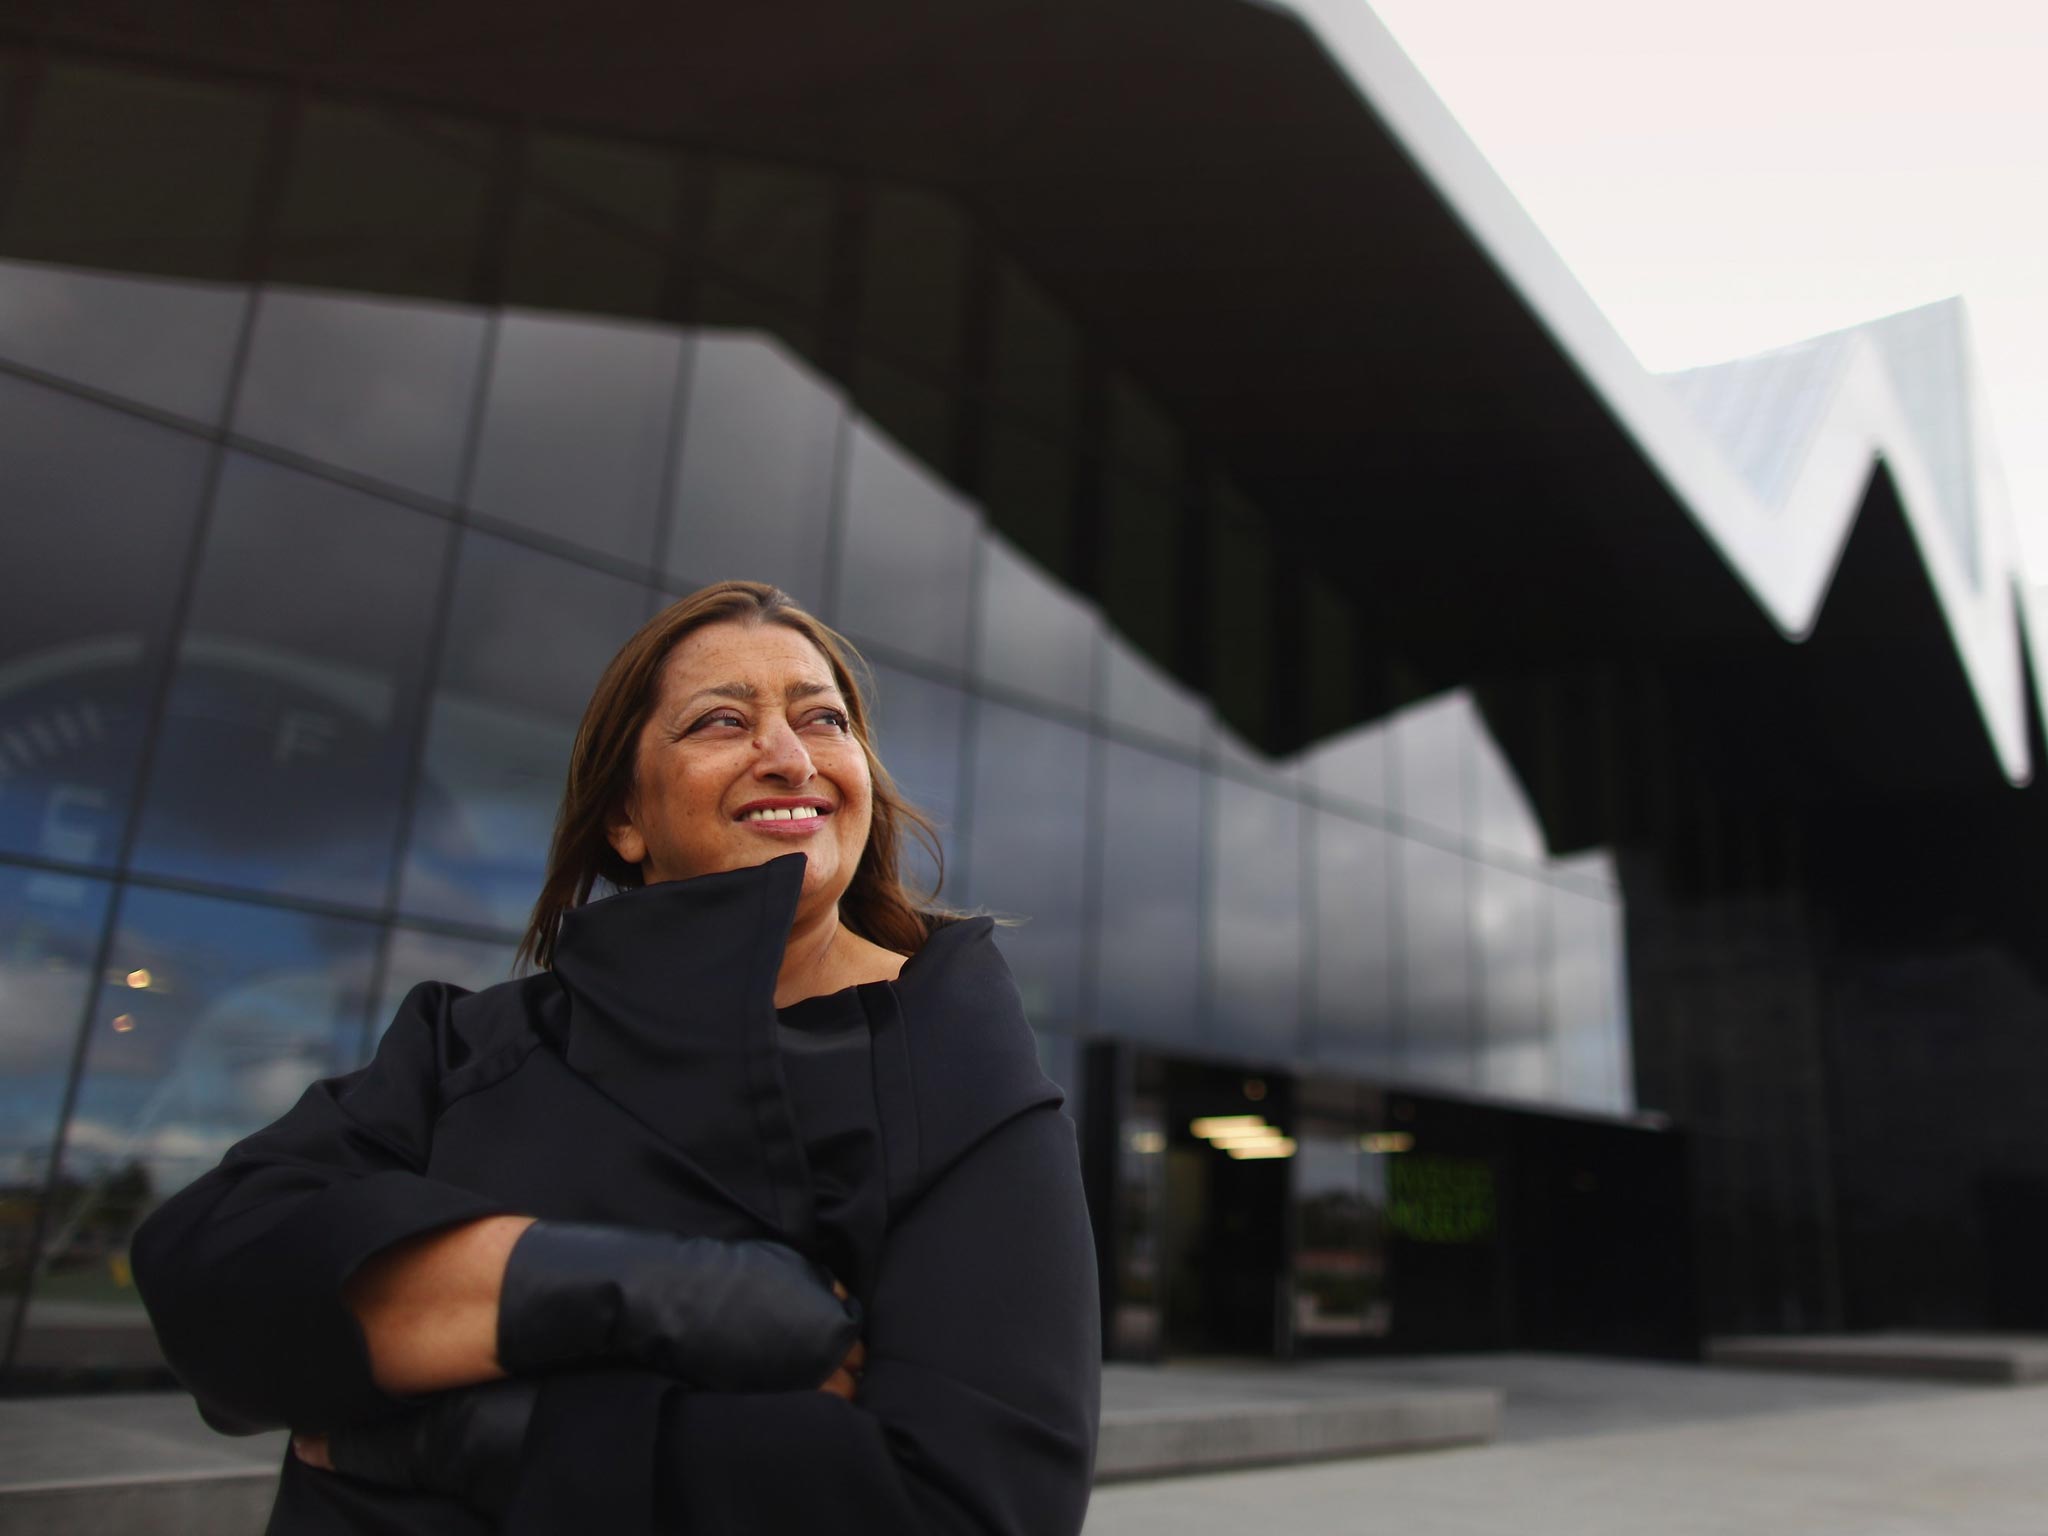 Dame Zaha Hadid became the first woman to win the RIBA Gold Medal earlier this year